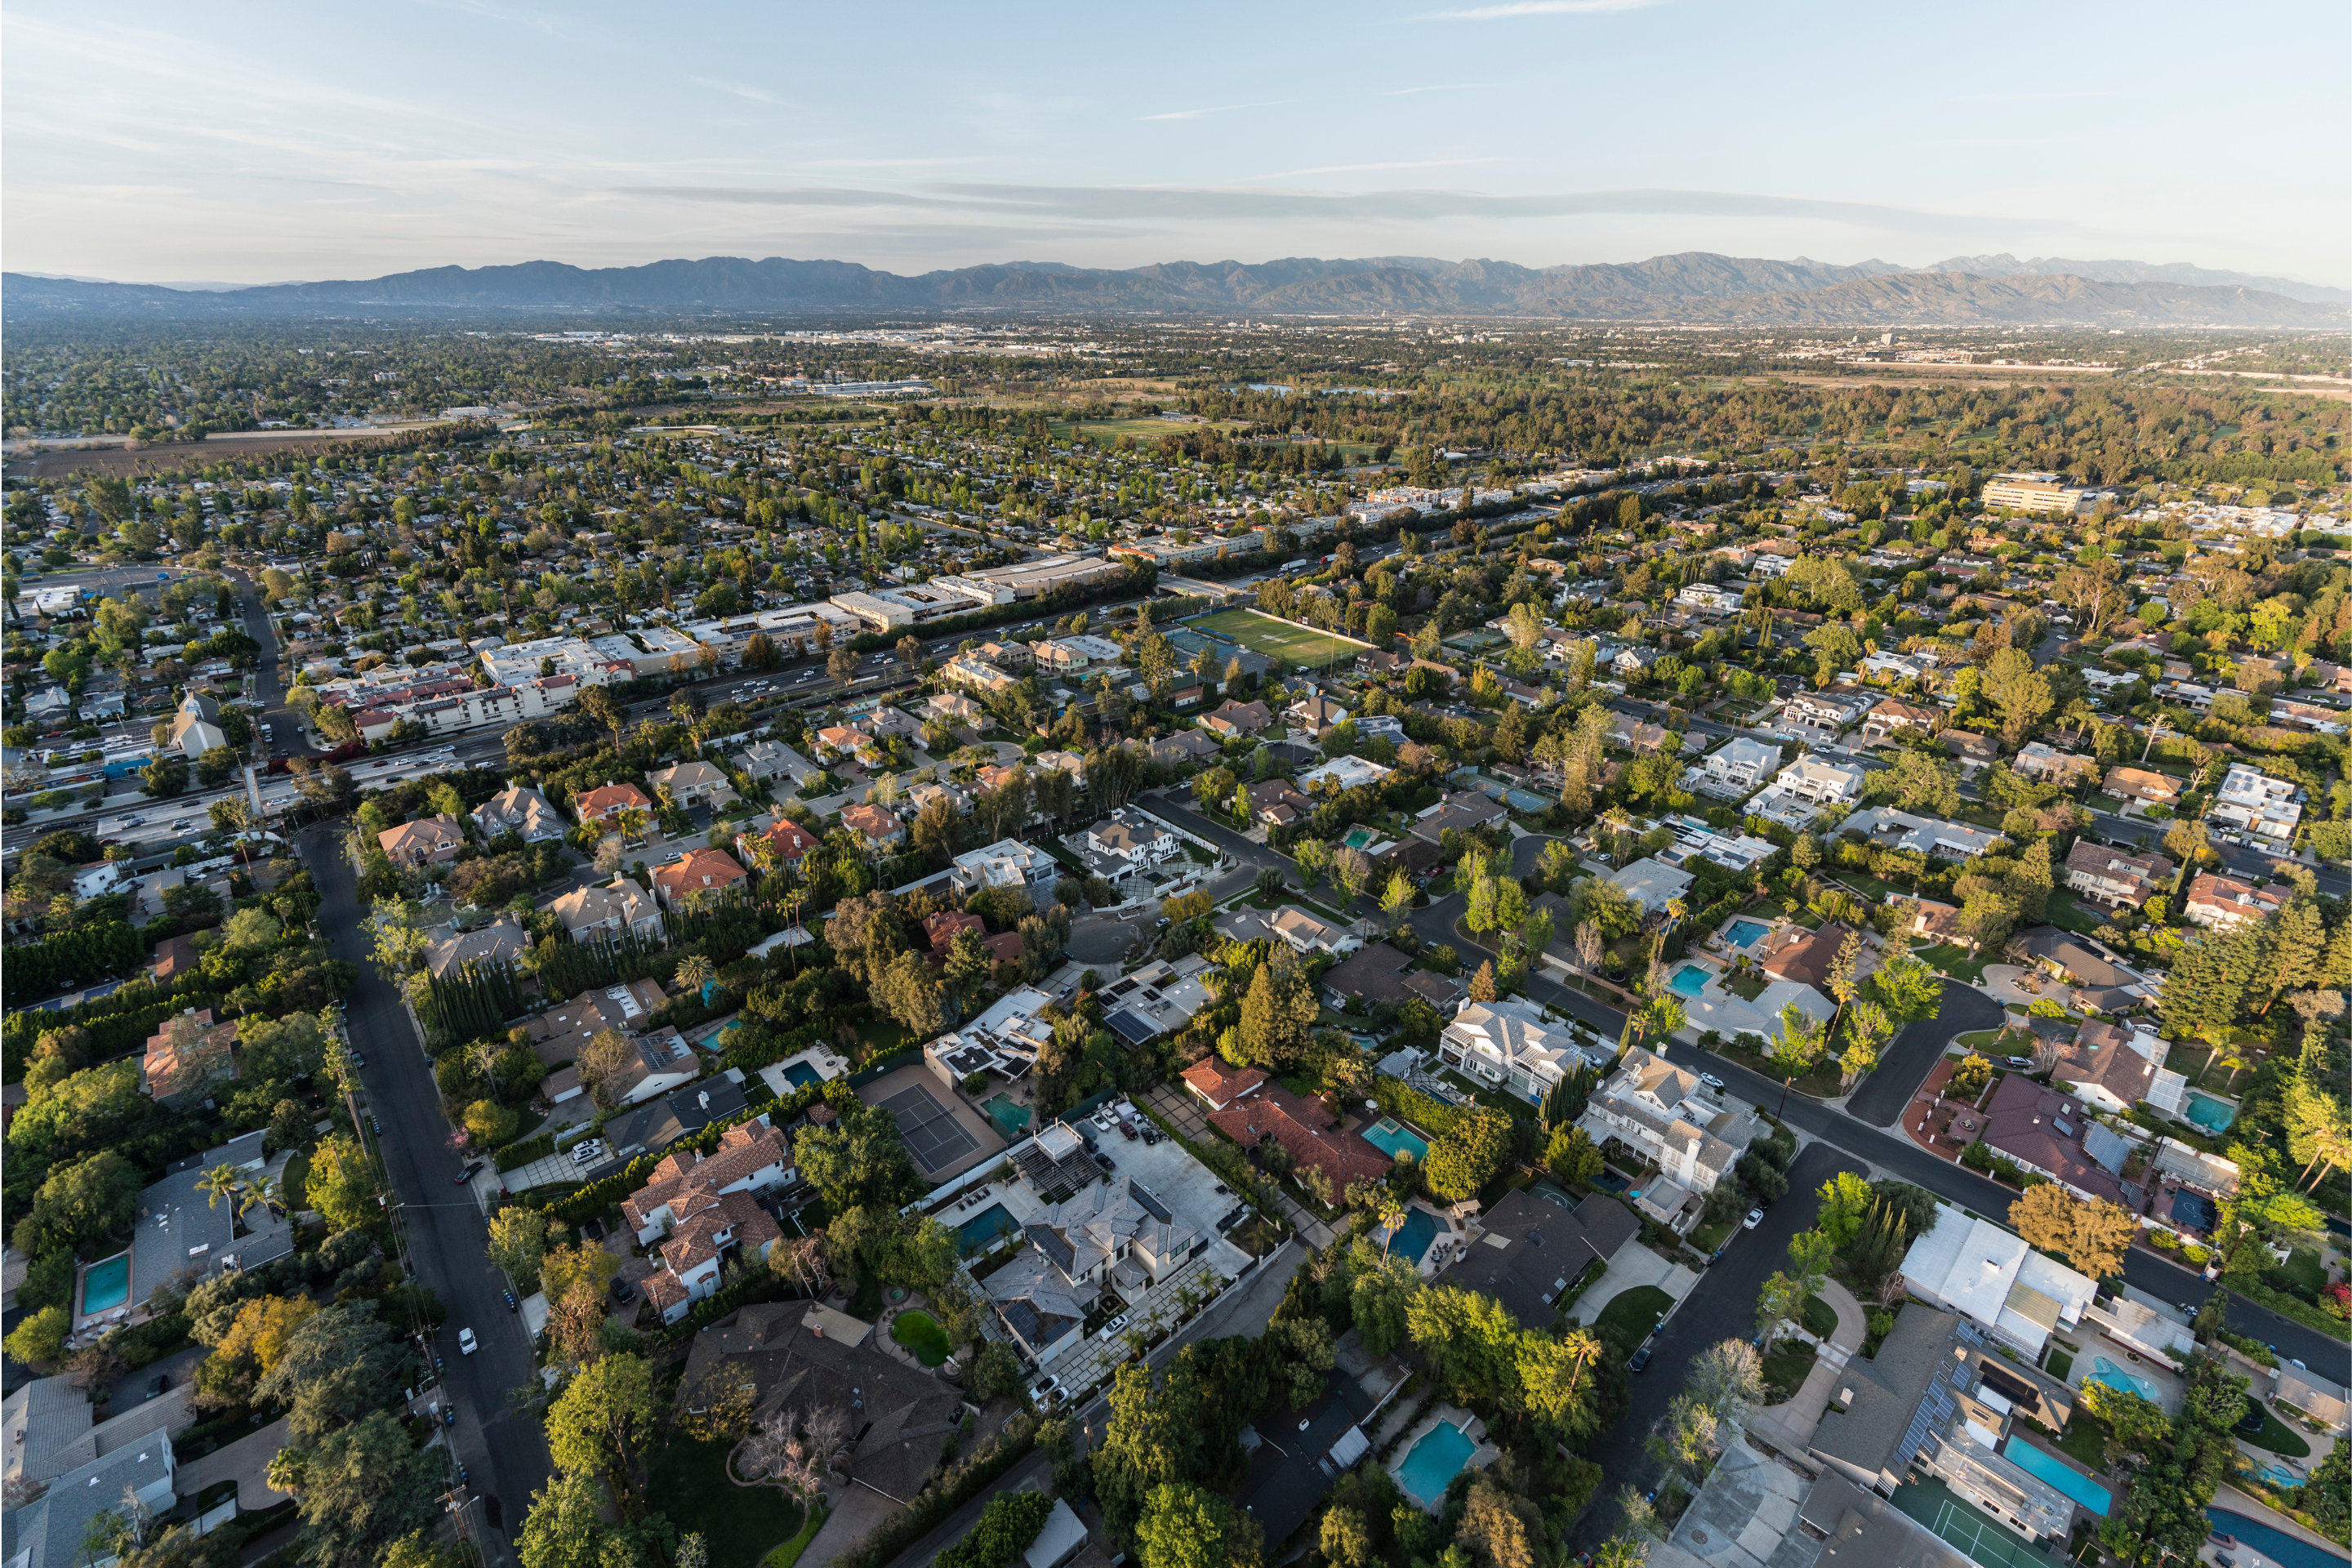 is encino a good place to live - Encino, CA Real Estate Investment